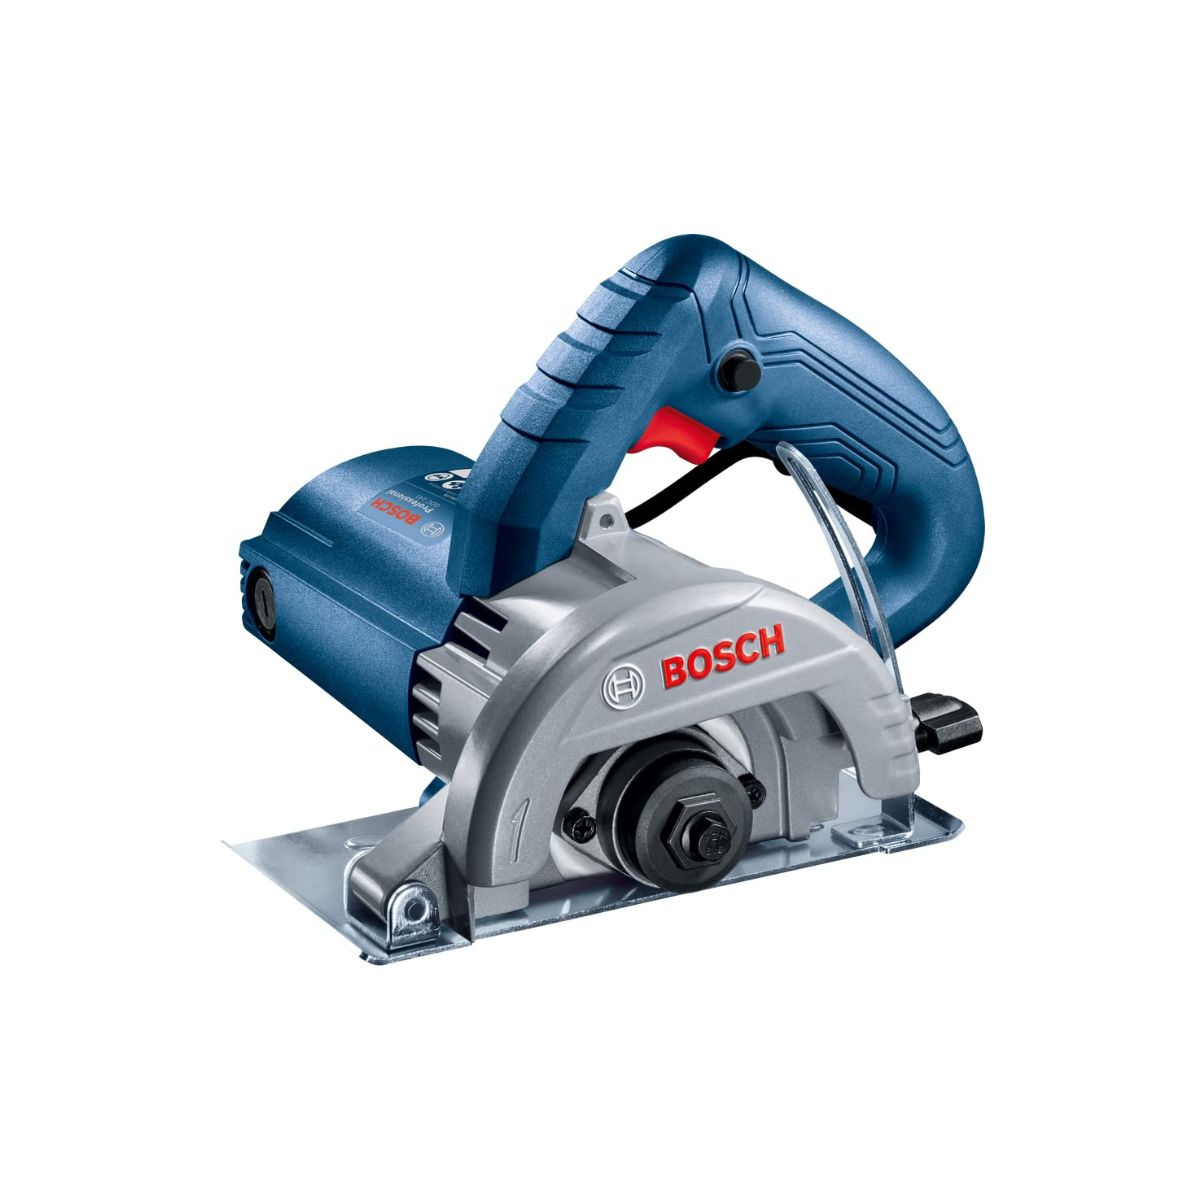 Buy marble saw GDC141 at best price from bosch authorized distributor in Chennai